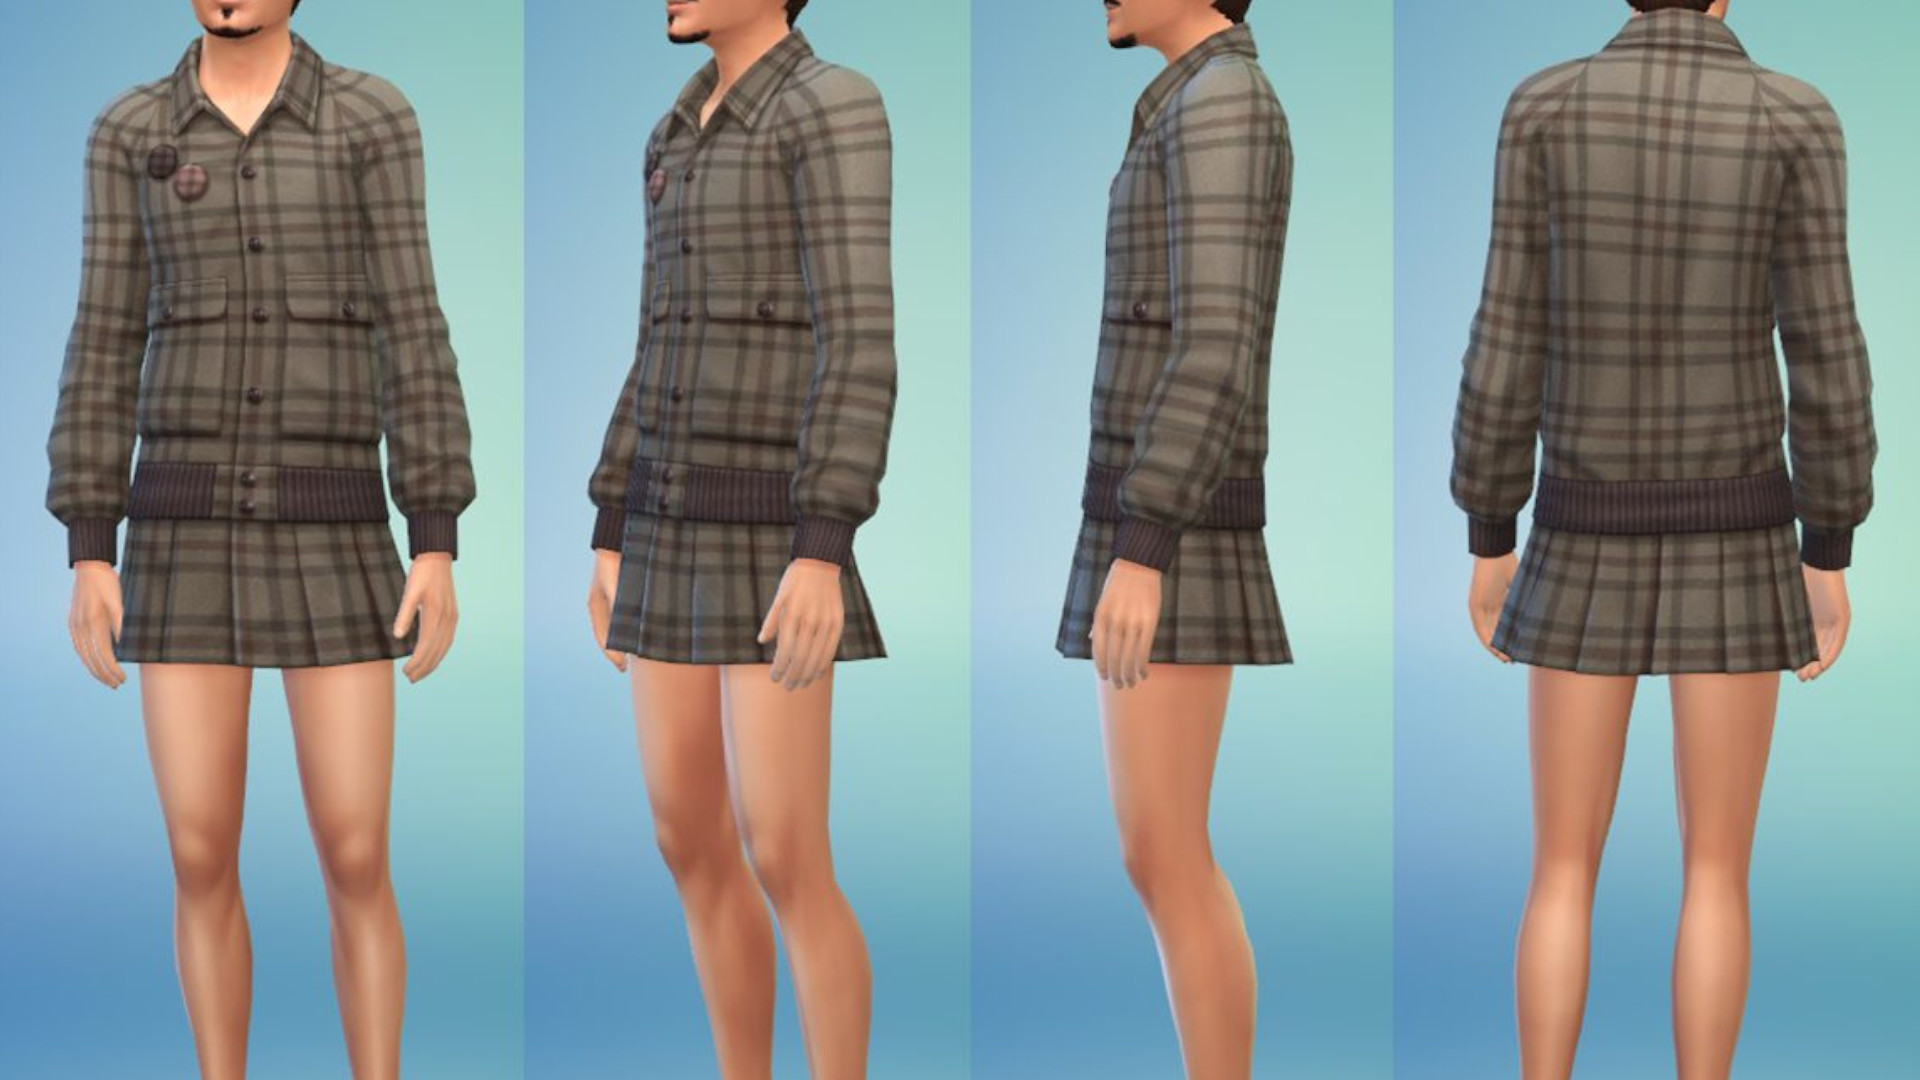 The Sims 4's next kit adds masculine skirts